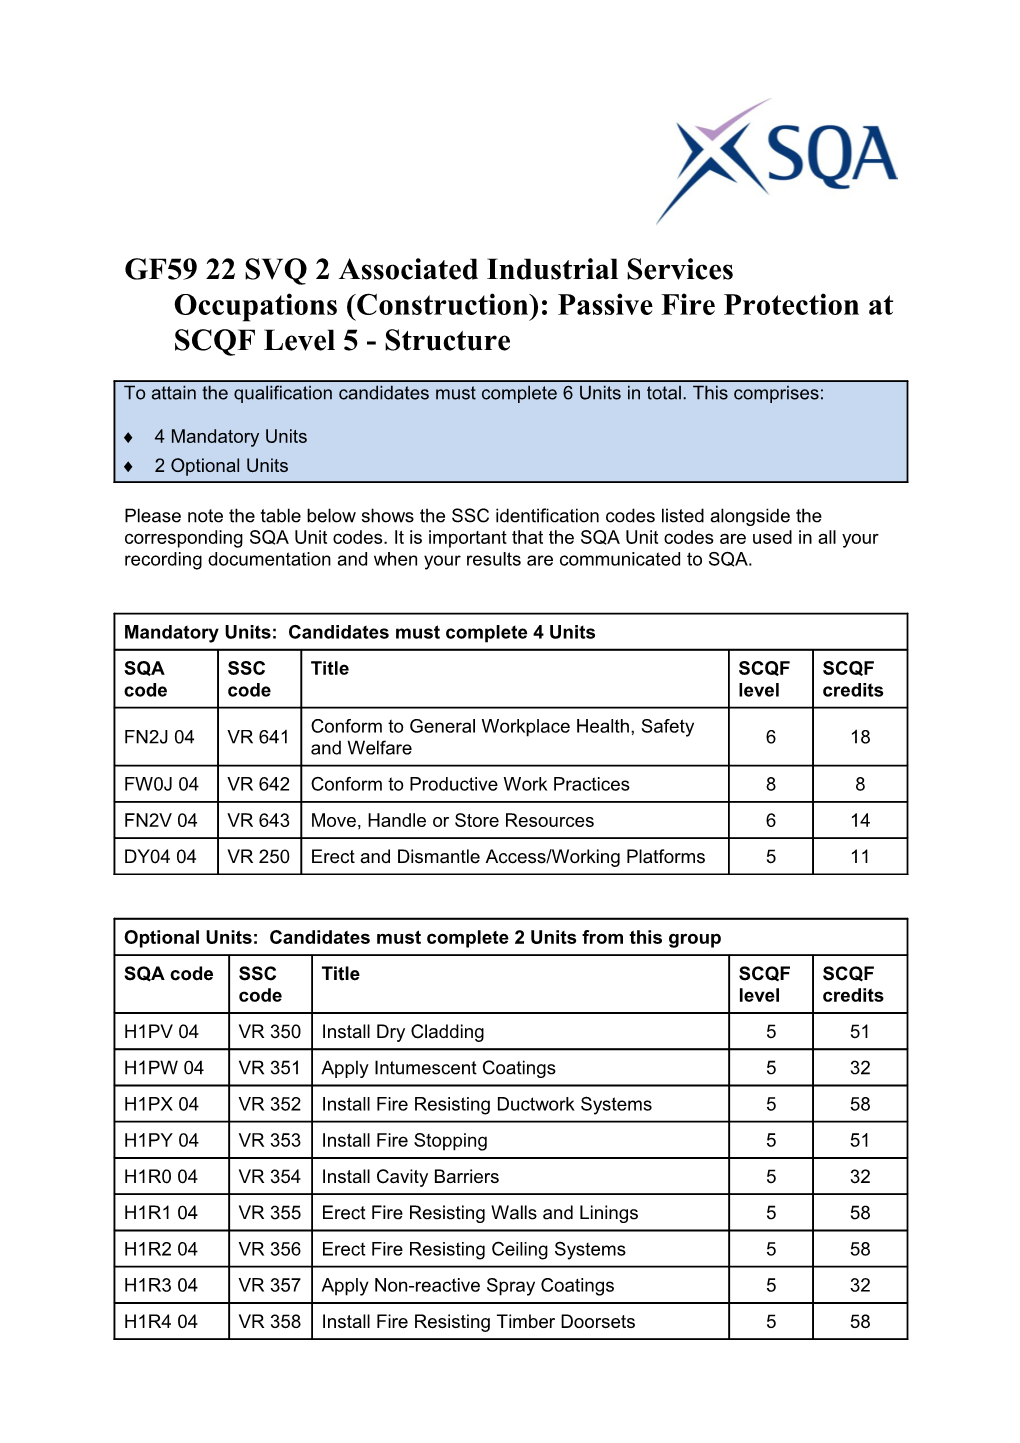 GF59 22 SVQ 2 Associated Industrial Services Occupations (Construction): Passive Fire Protection